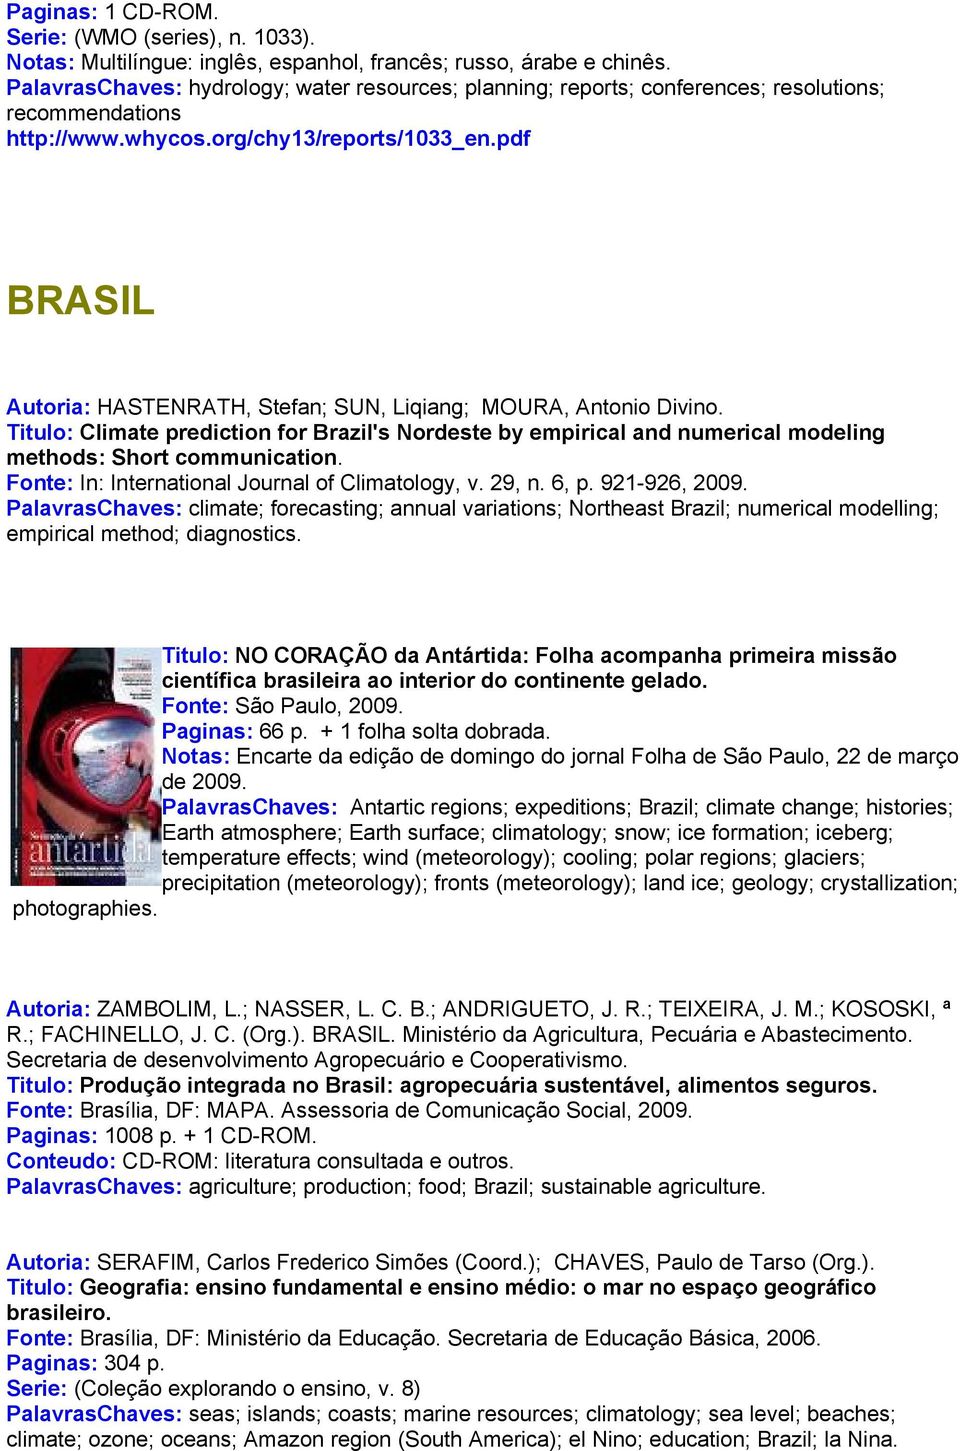 pdf BRASIL Autoria: HASTENRATH, Stefan; SUN, Liqiang; MOURA, Antonio Divino. Titulo: Climate prediction for Brazil's Nordeste by empirical and numerical modeling methods: Short communication.